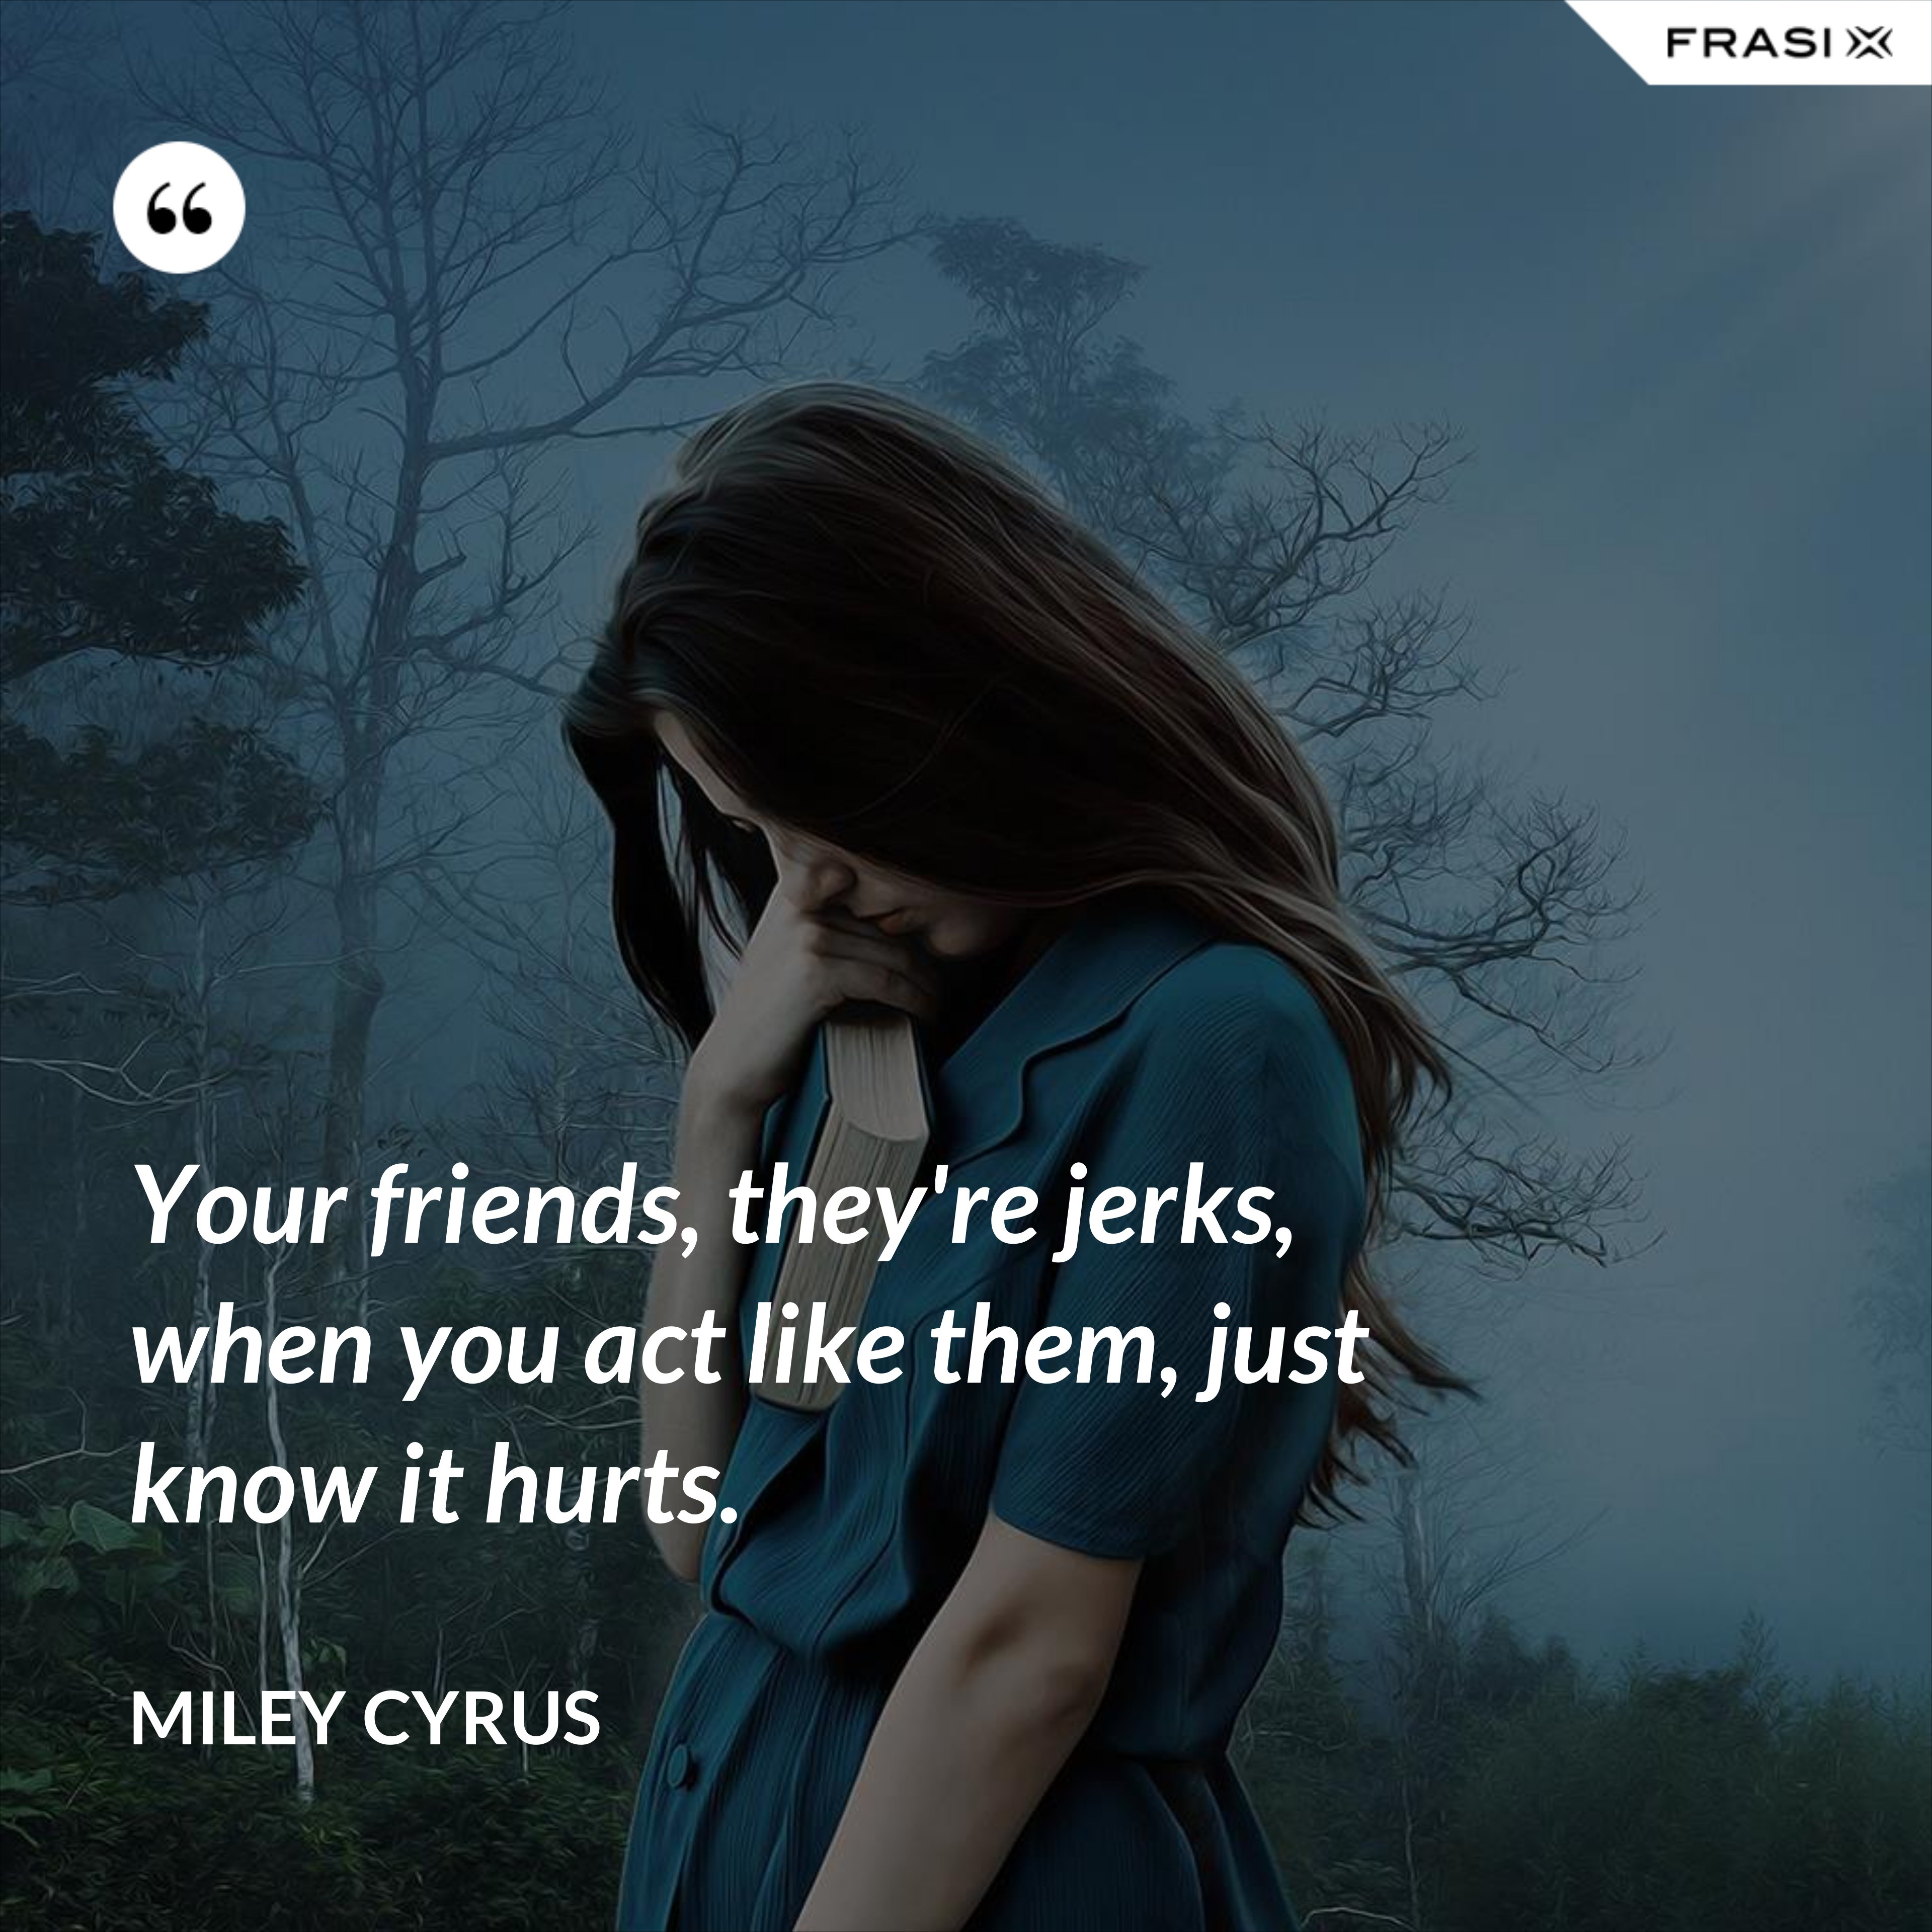 Your friends, they're jerks, when you act like them, just know it hurts. - Miley Cyrus